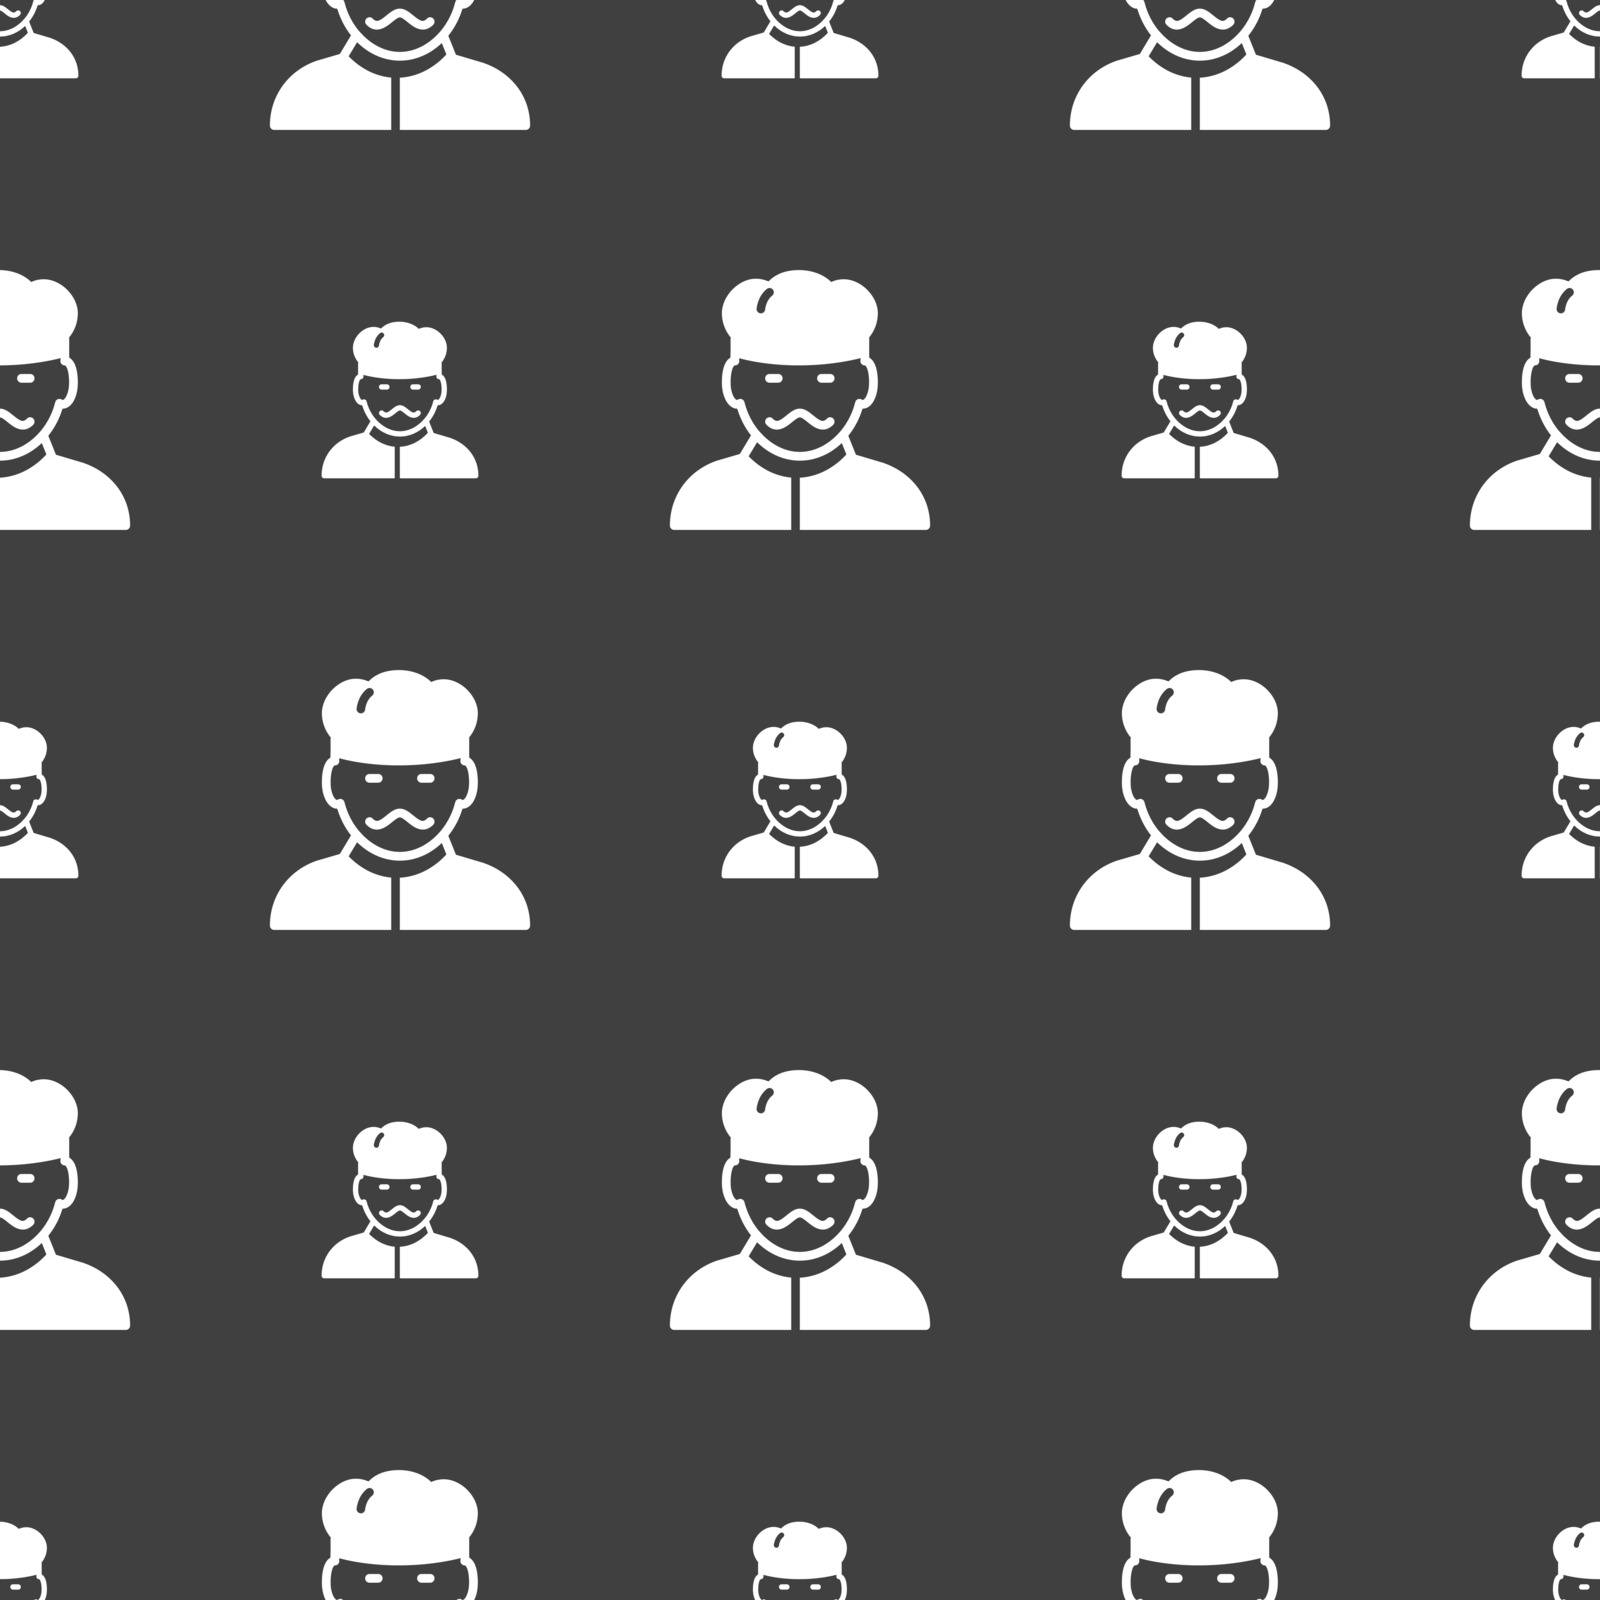 Cook icon sign. Seamless pattern on a gray background. Vector illustration